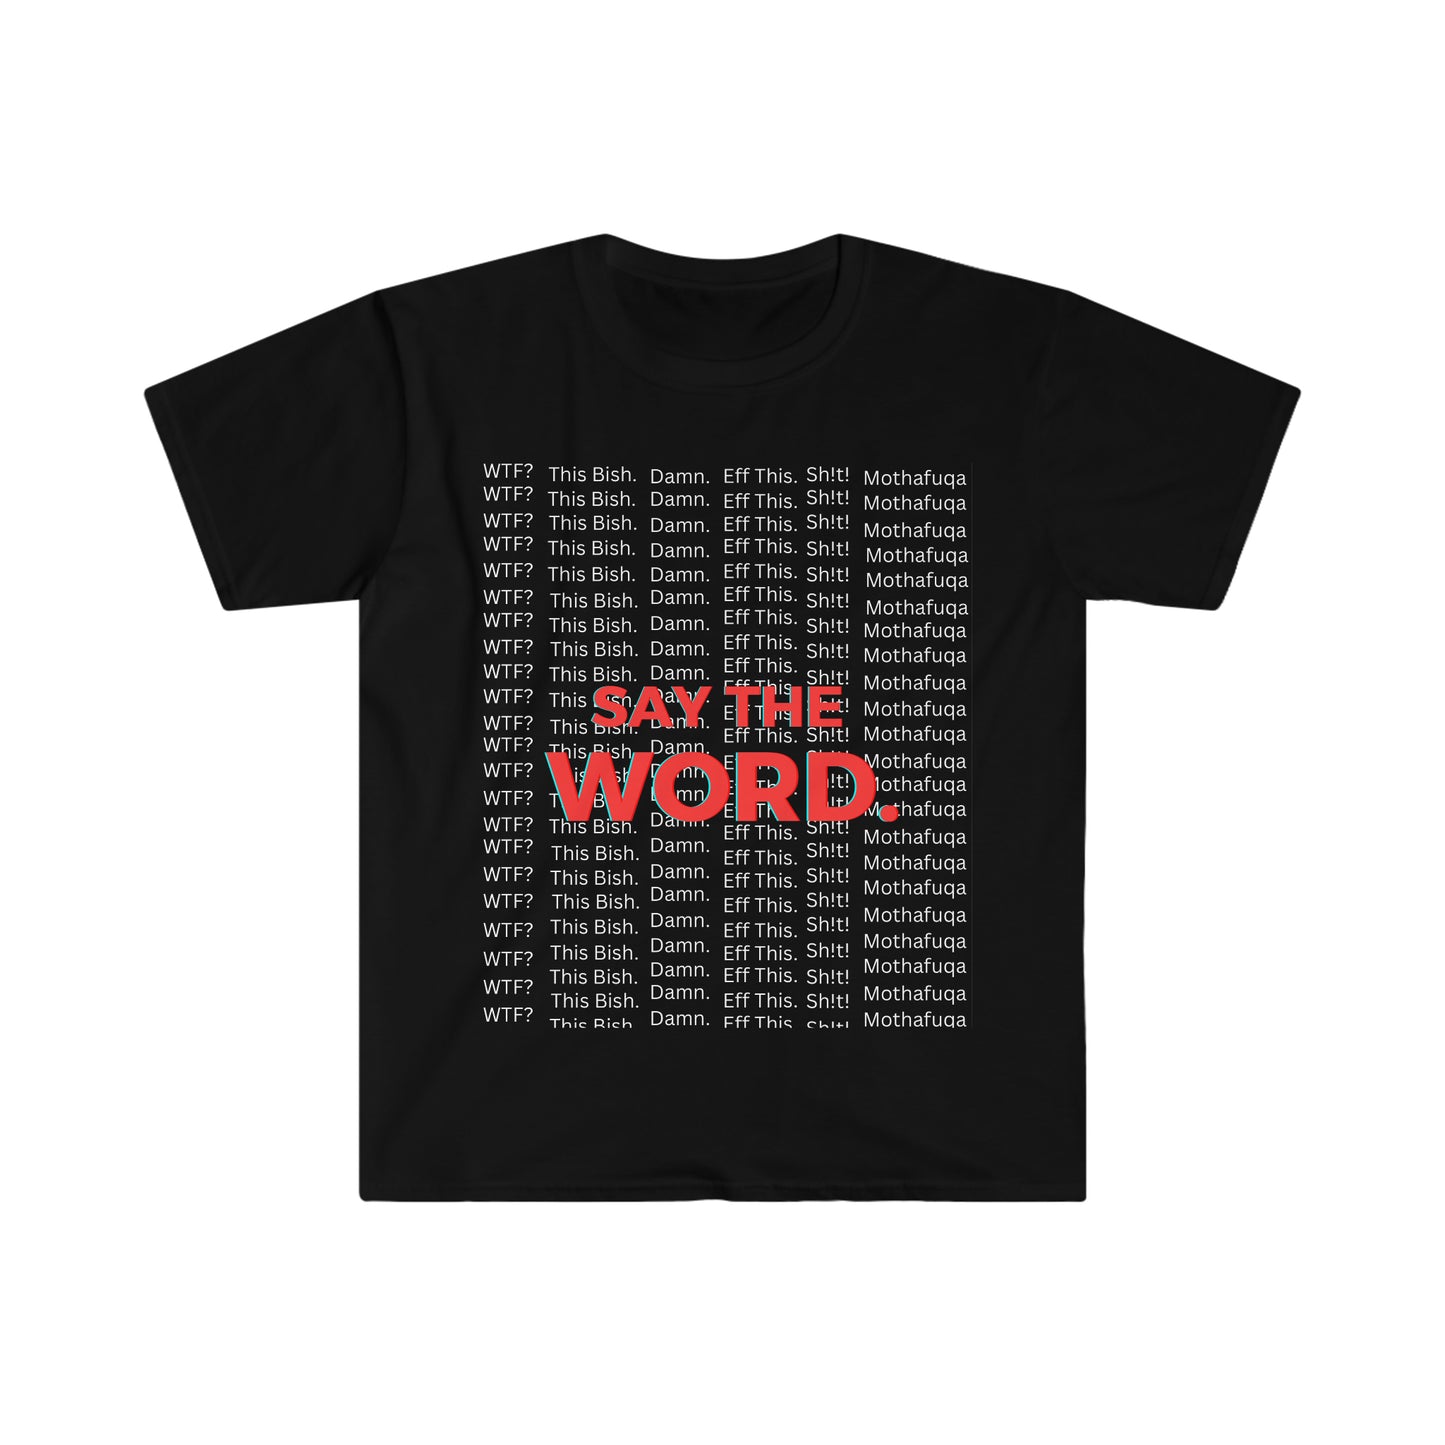 Say The Word - Unisex Softstyle T-Shirt BLK